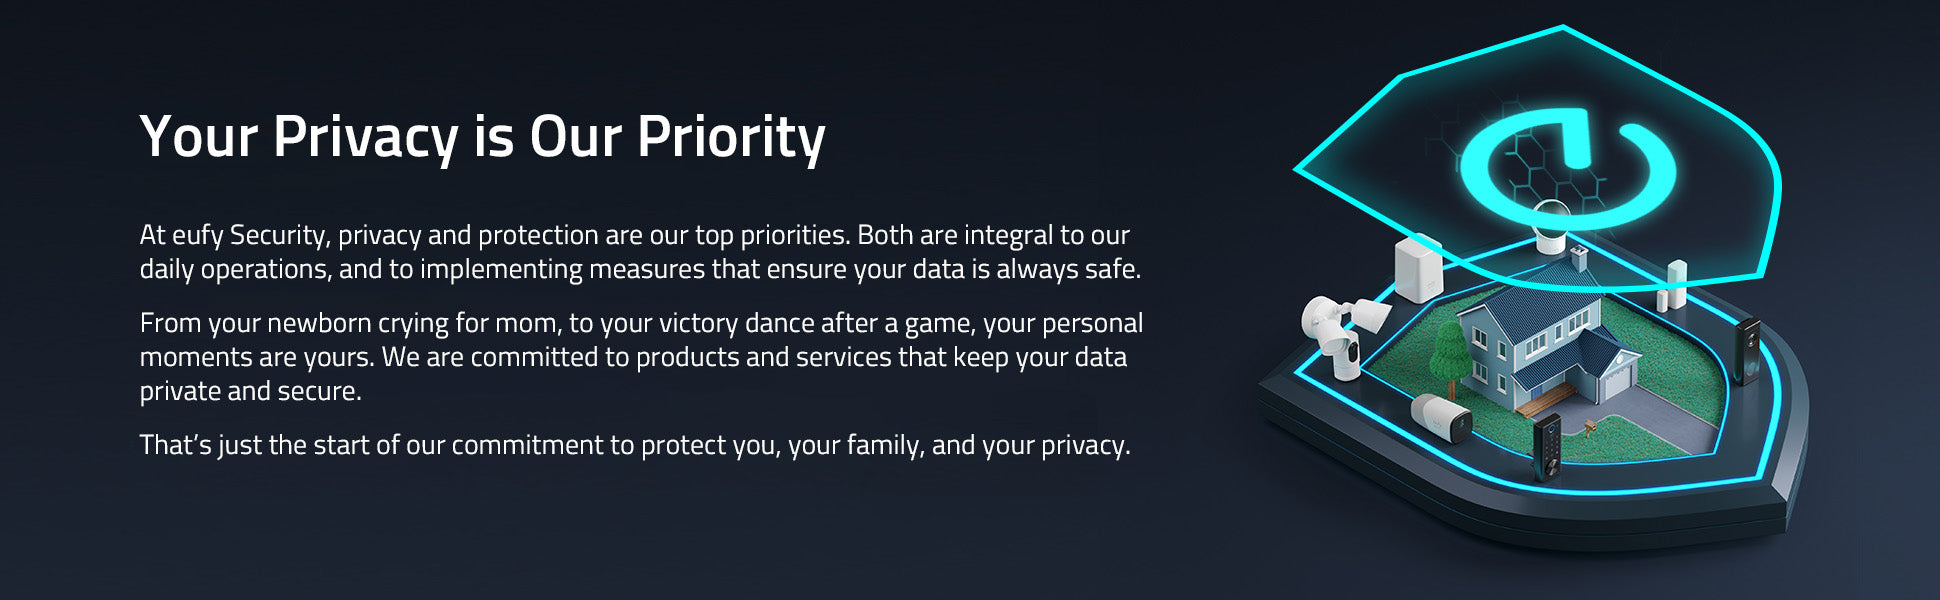 Your_Privacy_is_Our_Priority_4